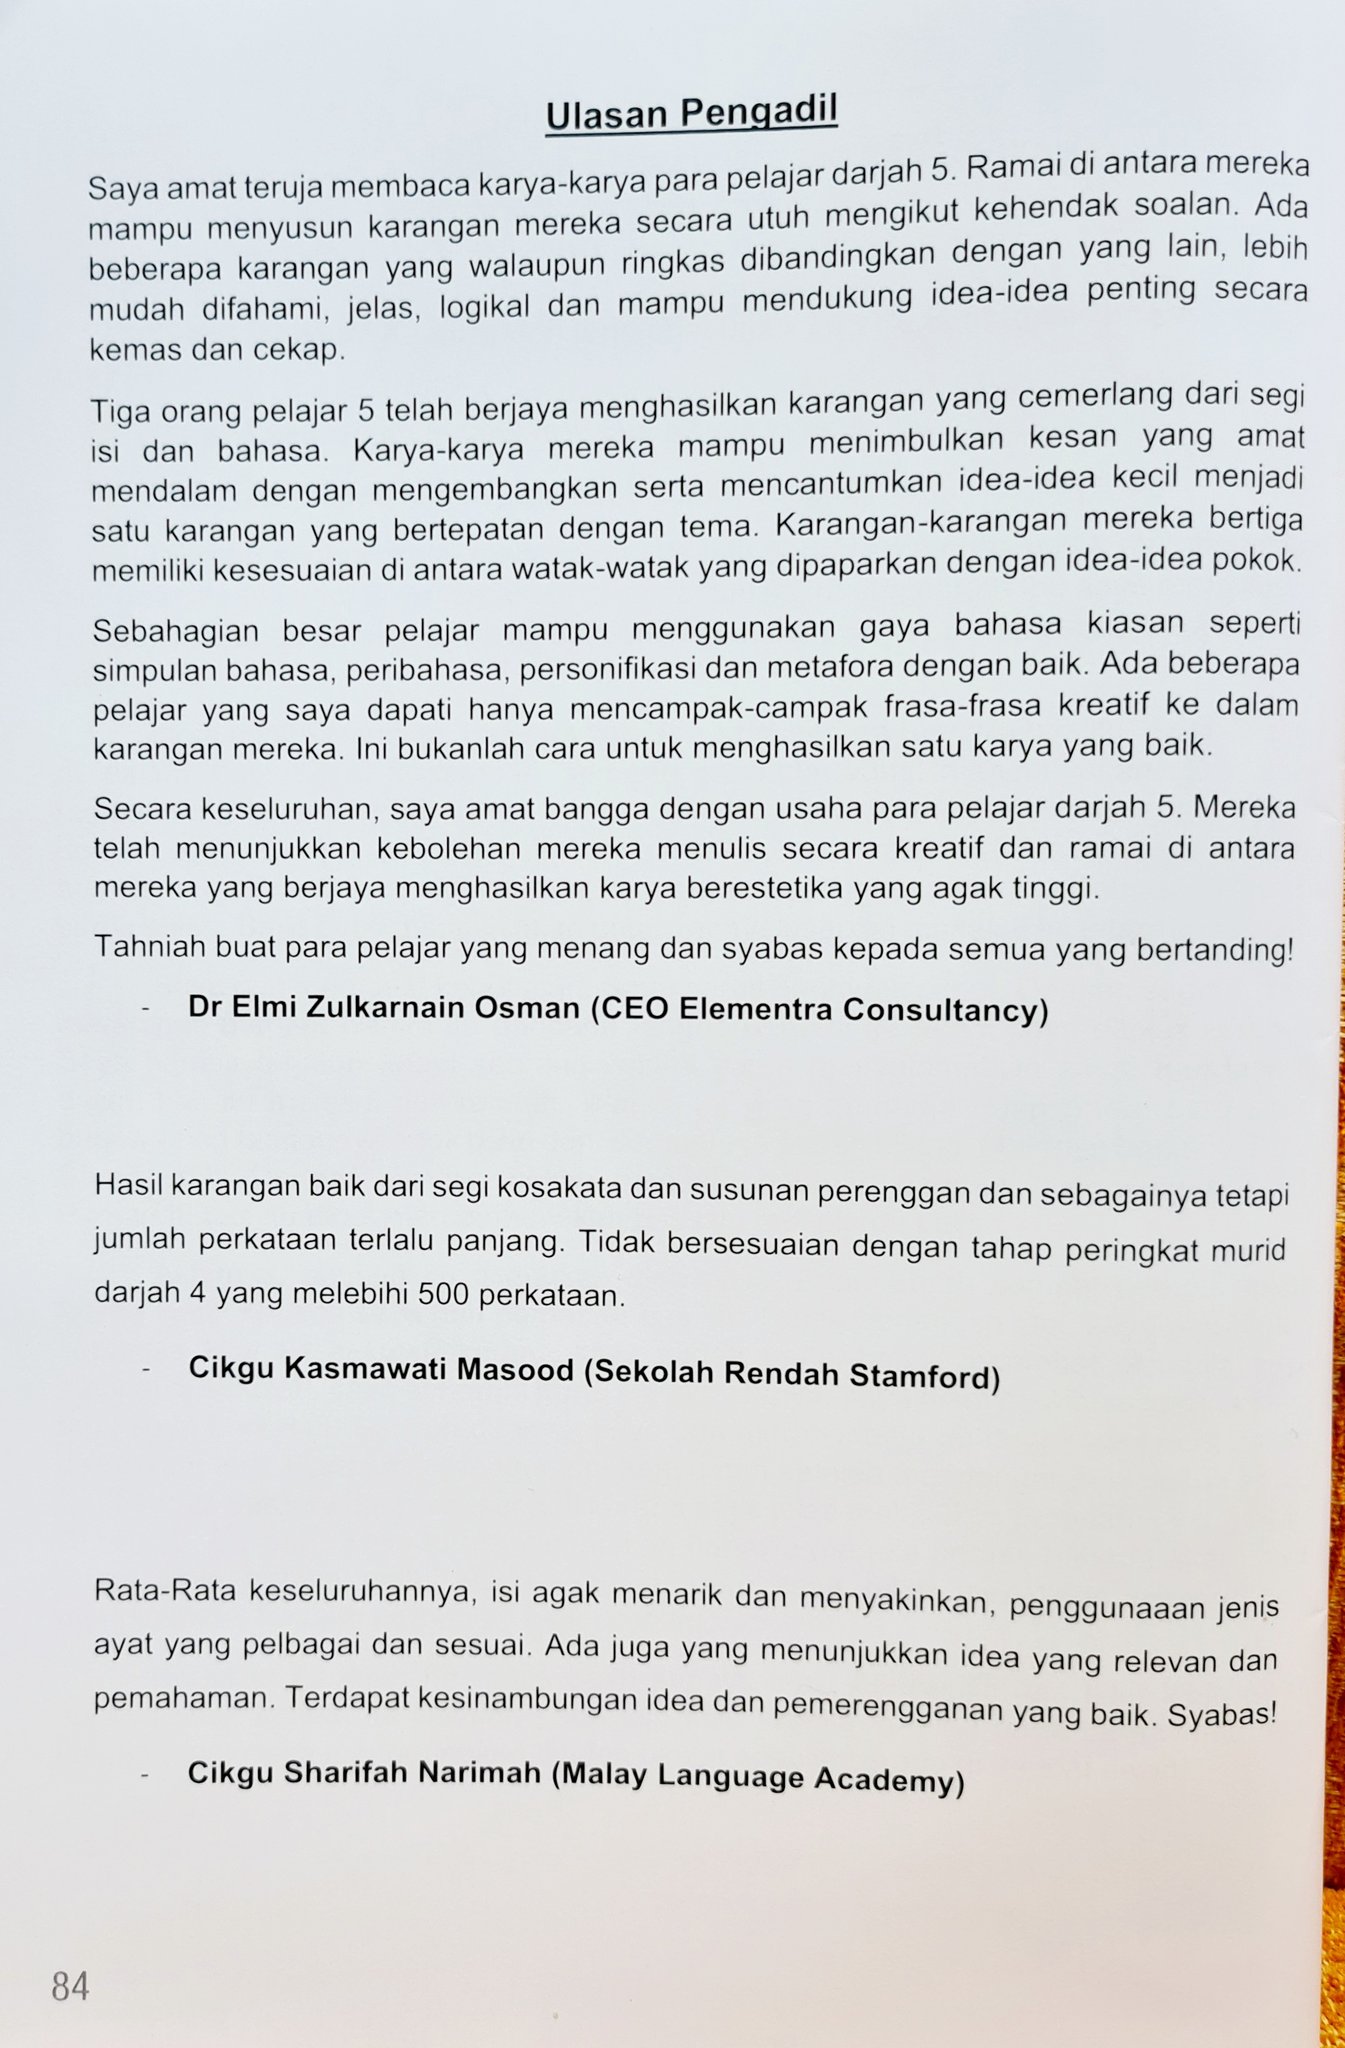 Dr Elmi Zulkarnain Osman On Twitter I Ve Been Privileged To Judge Several Creative Writing Competitions Over The Last Few Years This Year I Would Like To Congratulate Clementi Cc Maec For Providing